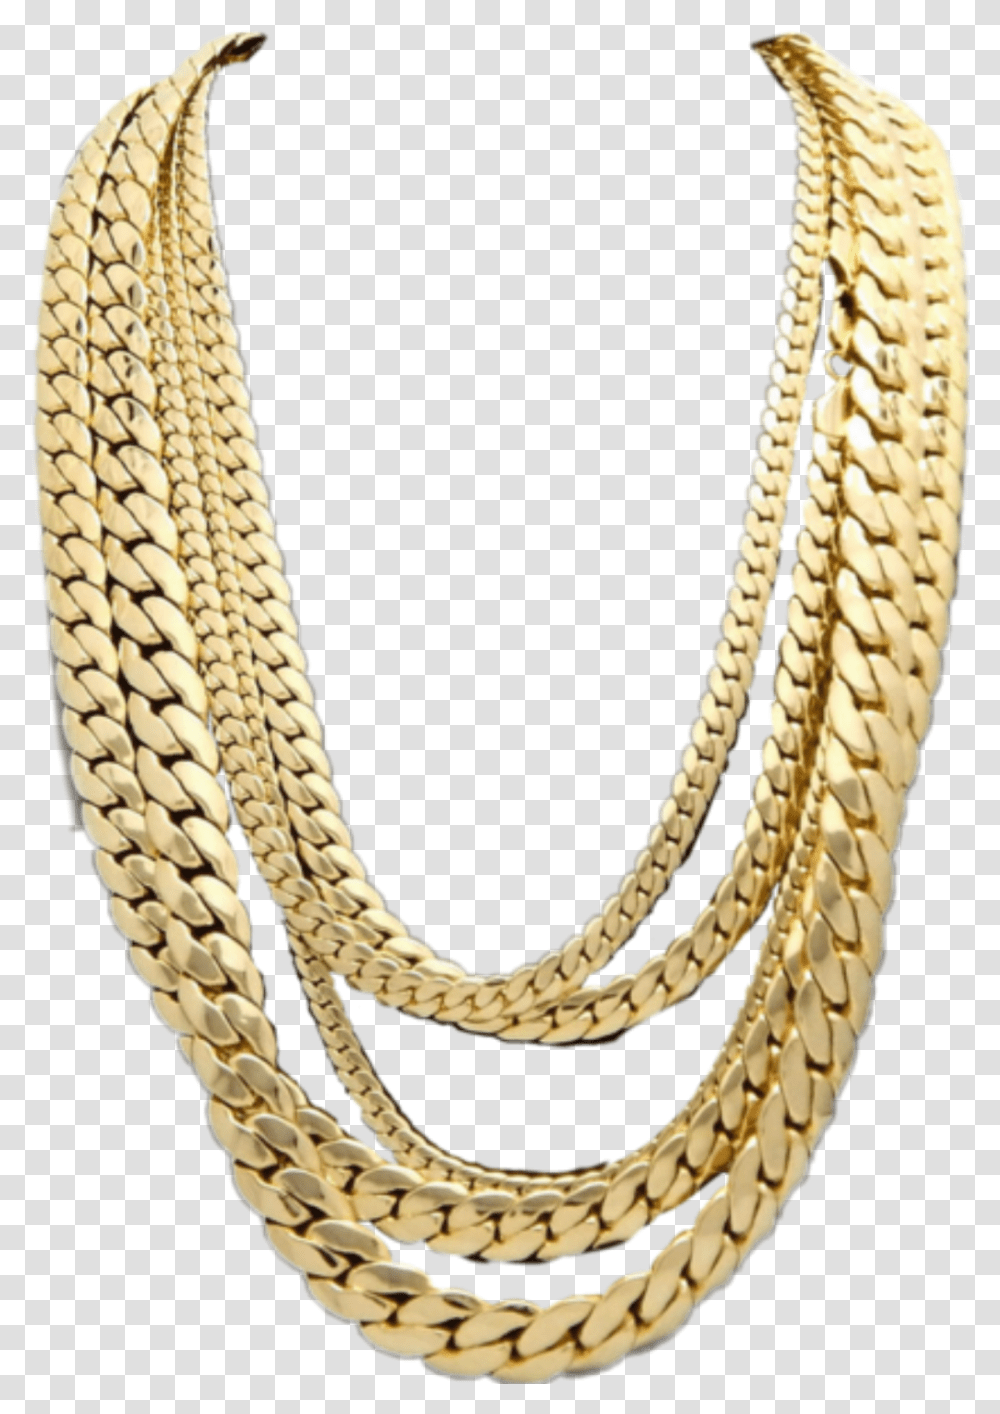 Gold Cuban Chain Set Gold Chain For Picsart, Snake, Reptile, Animal, Necklace Transparent Png